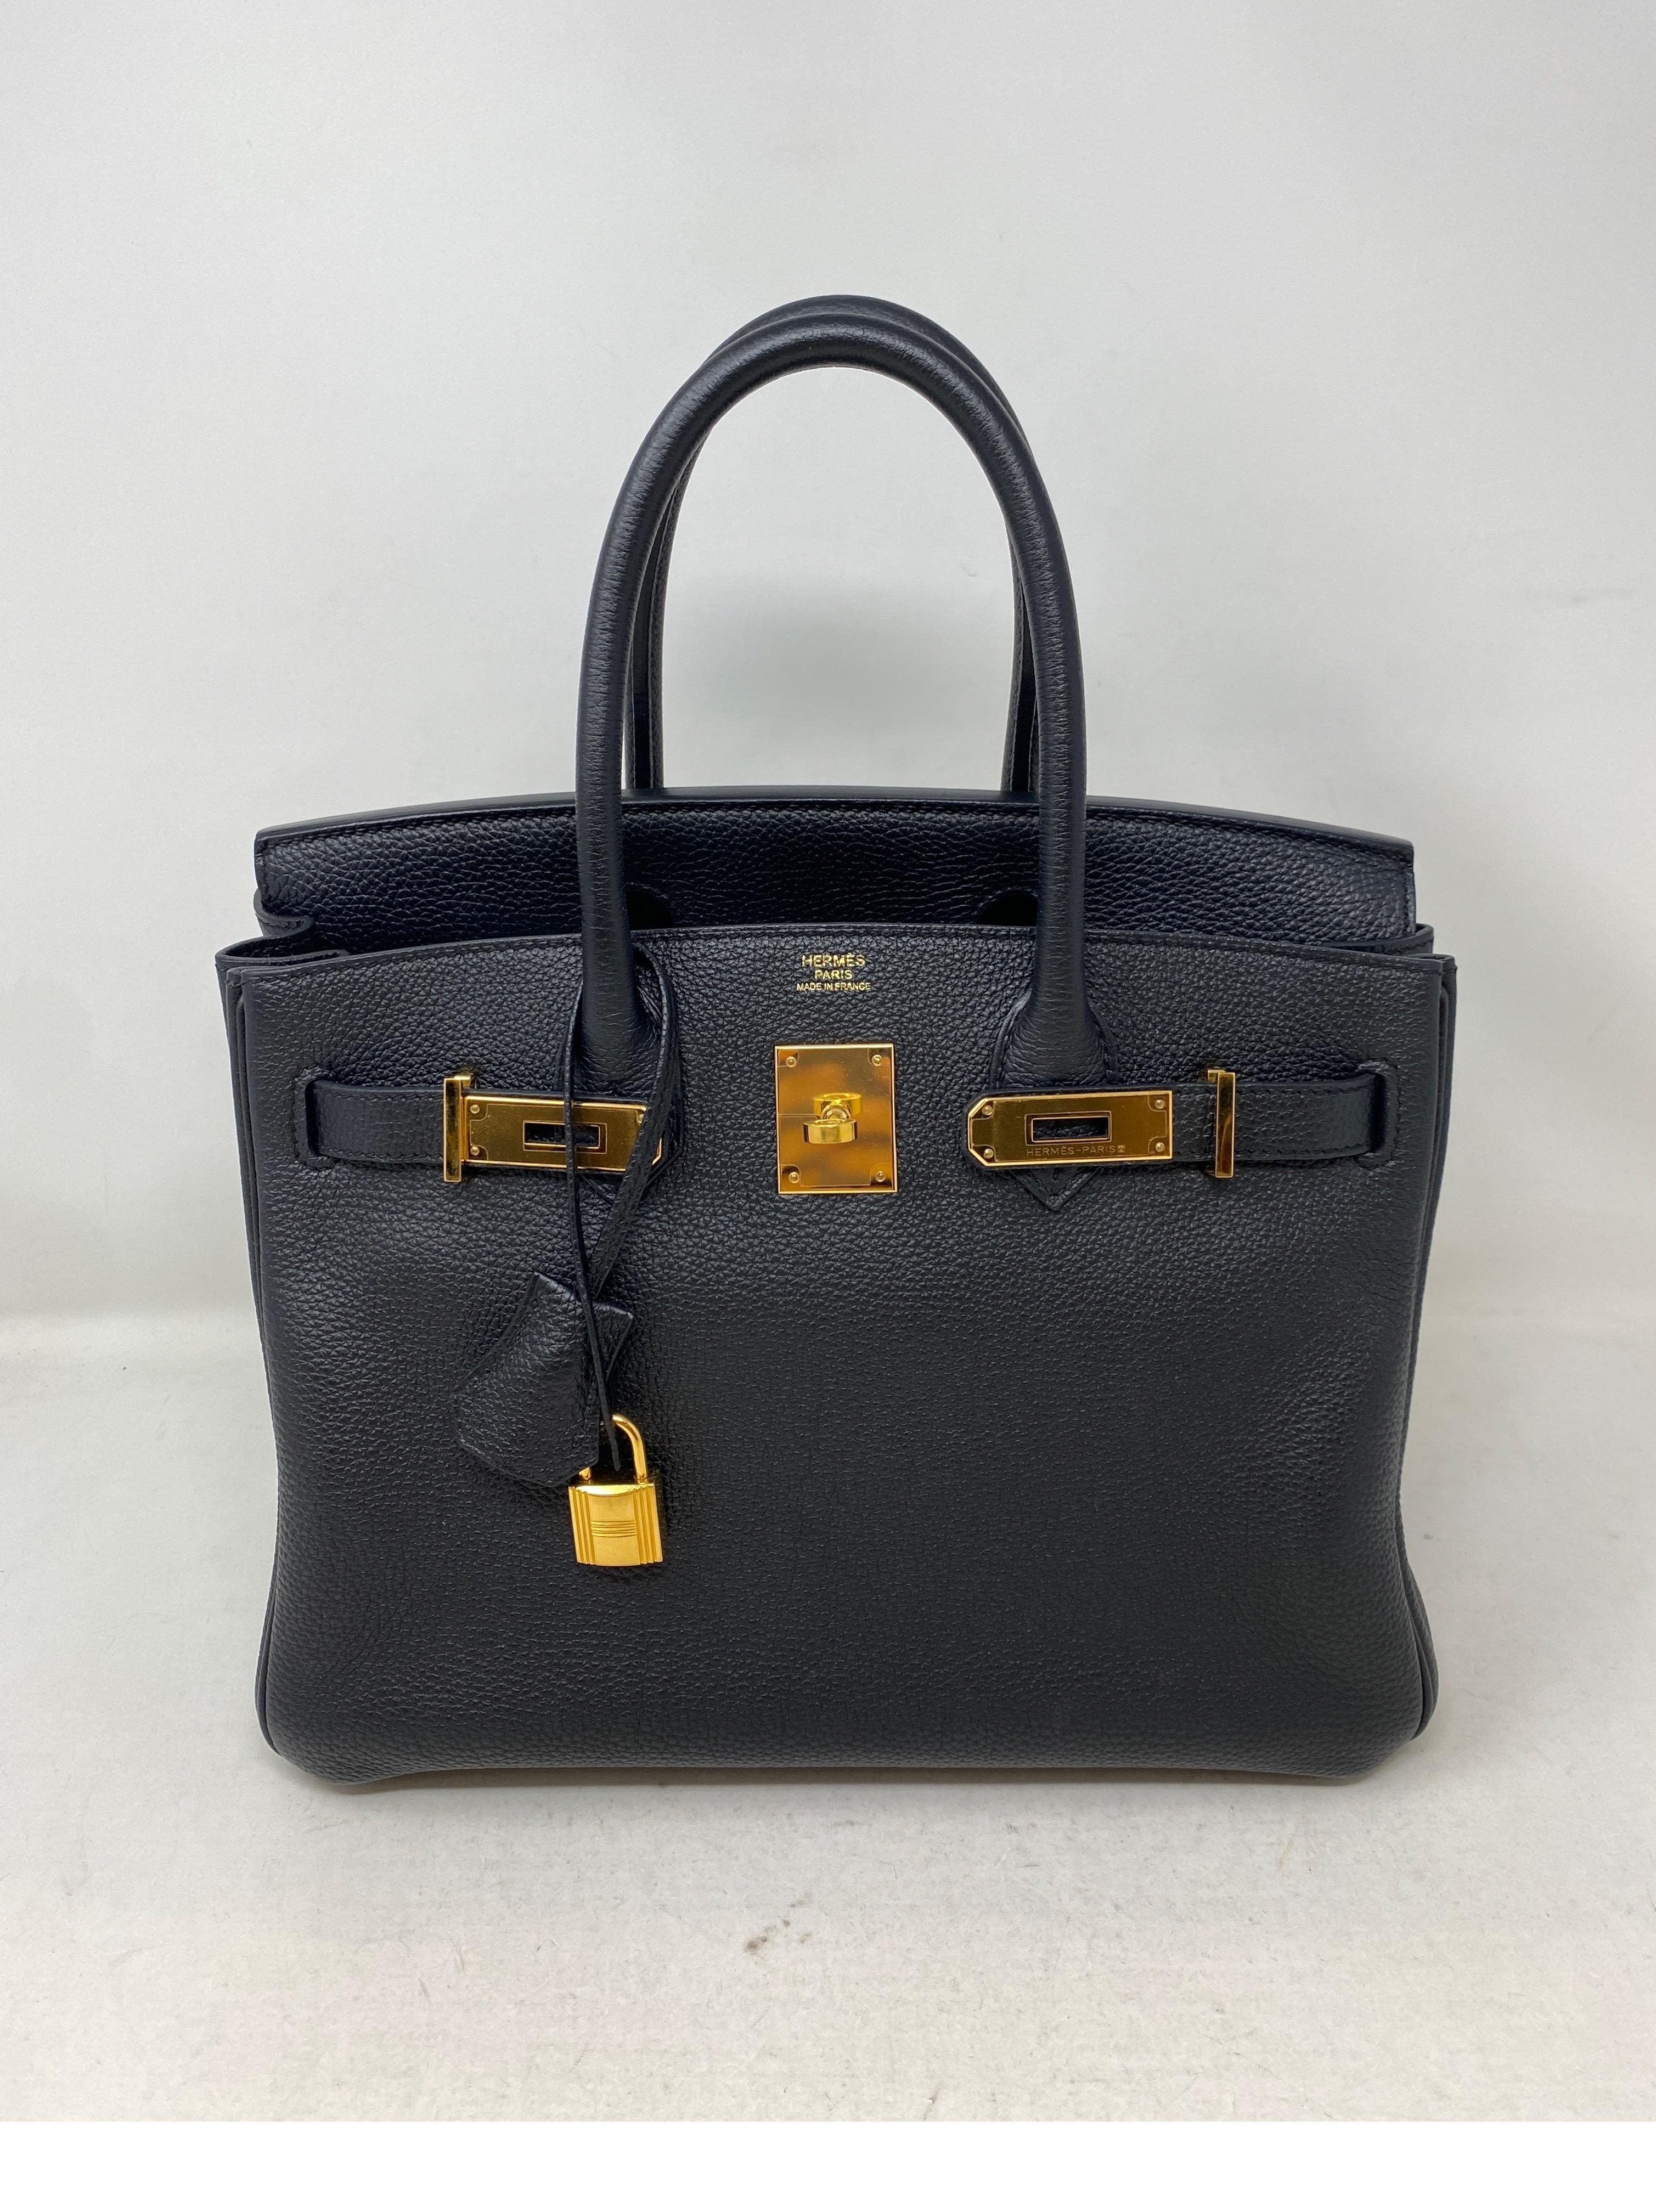 Hermes Black Birkin 30 Bag. Gold hardware. Excellent like new condition. Newer bag. Most wanted size and combination. Hard to get black. Don't miss out. Includes clochette, lock, keys, and dust cover. Guaranteed authentic. 